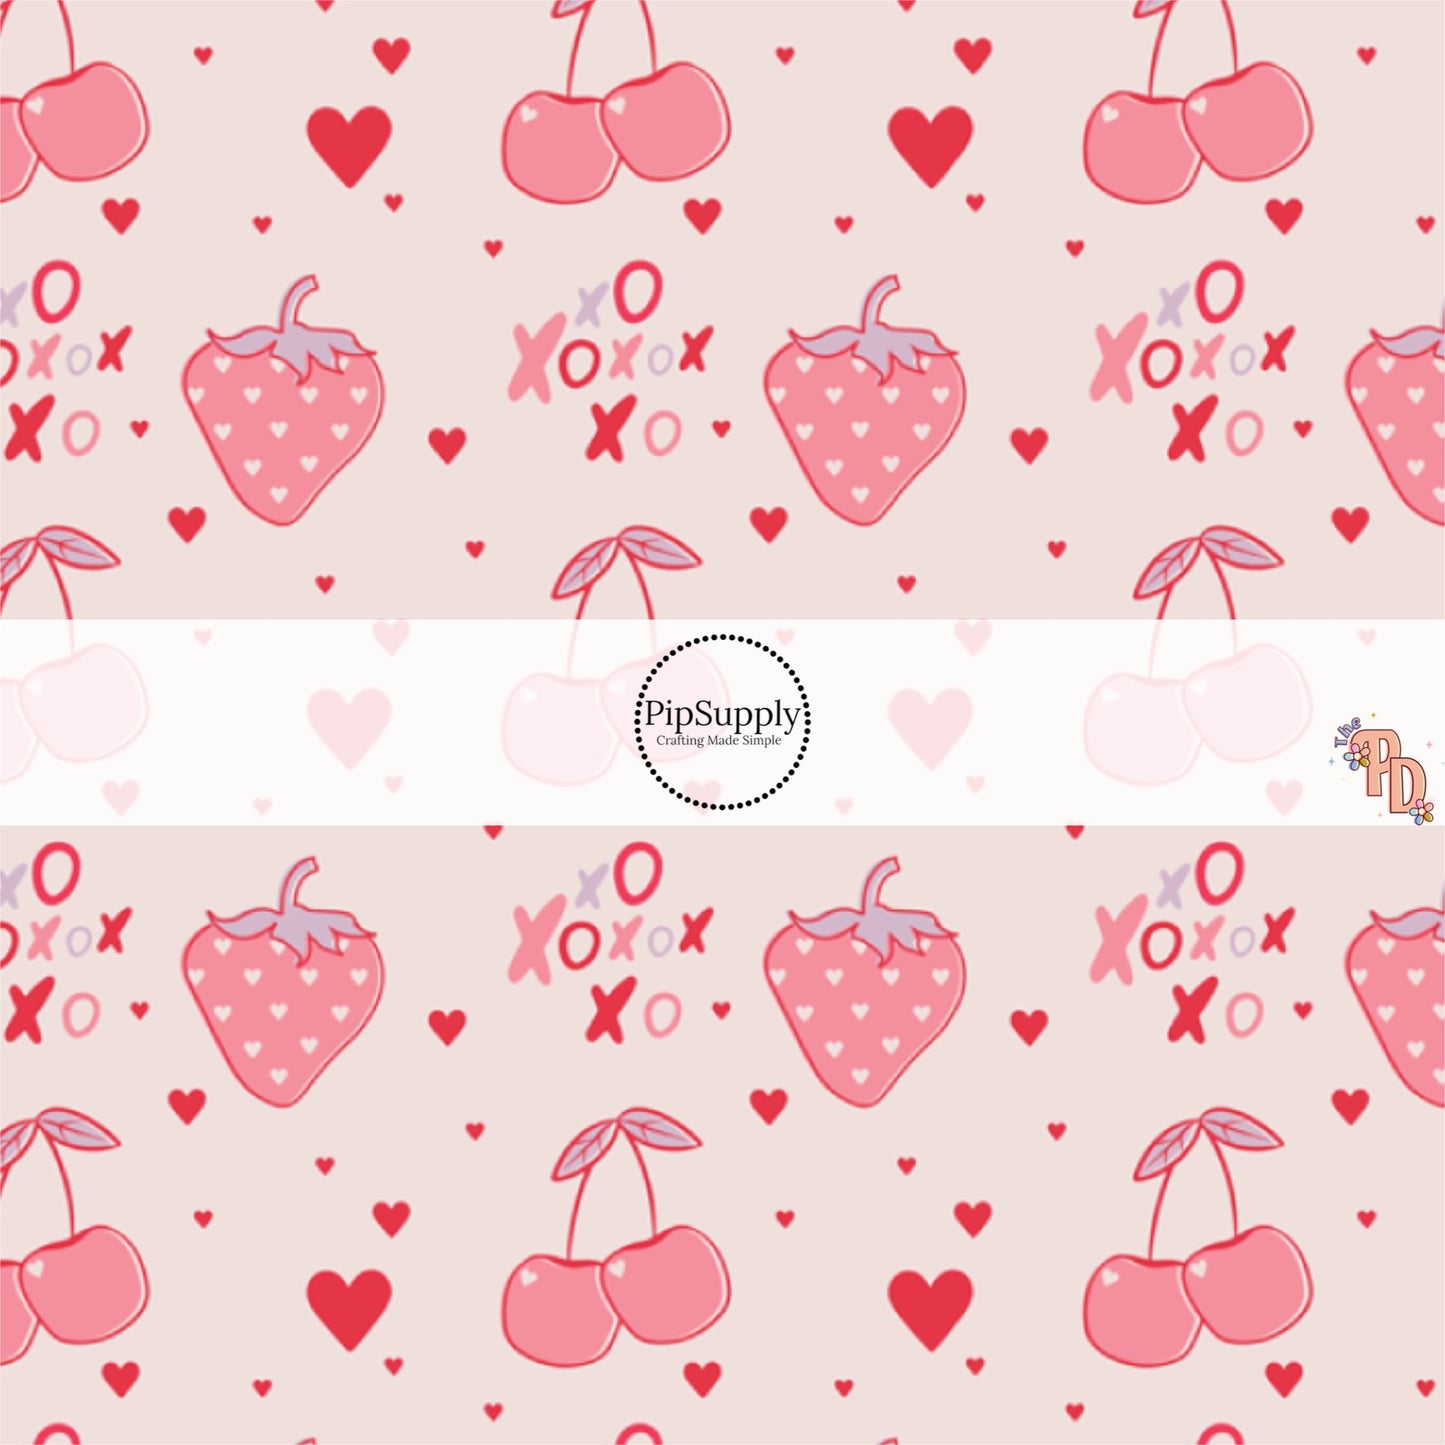 Cherries, Strawberries, Hearts, and XO's on Pale Pink  Fabric by the Yard